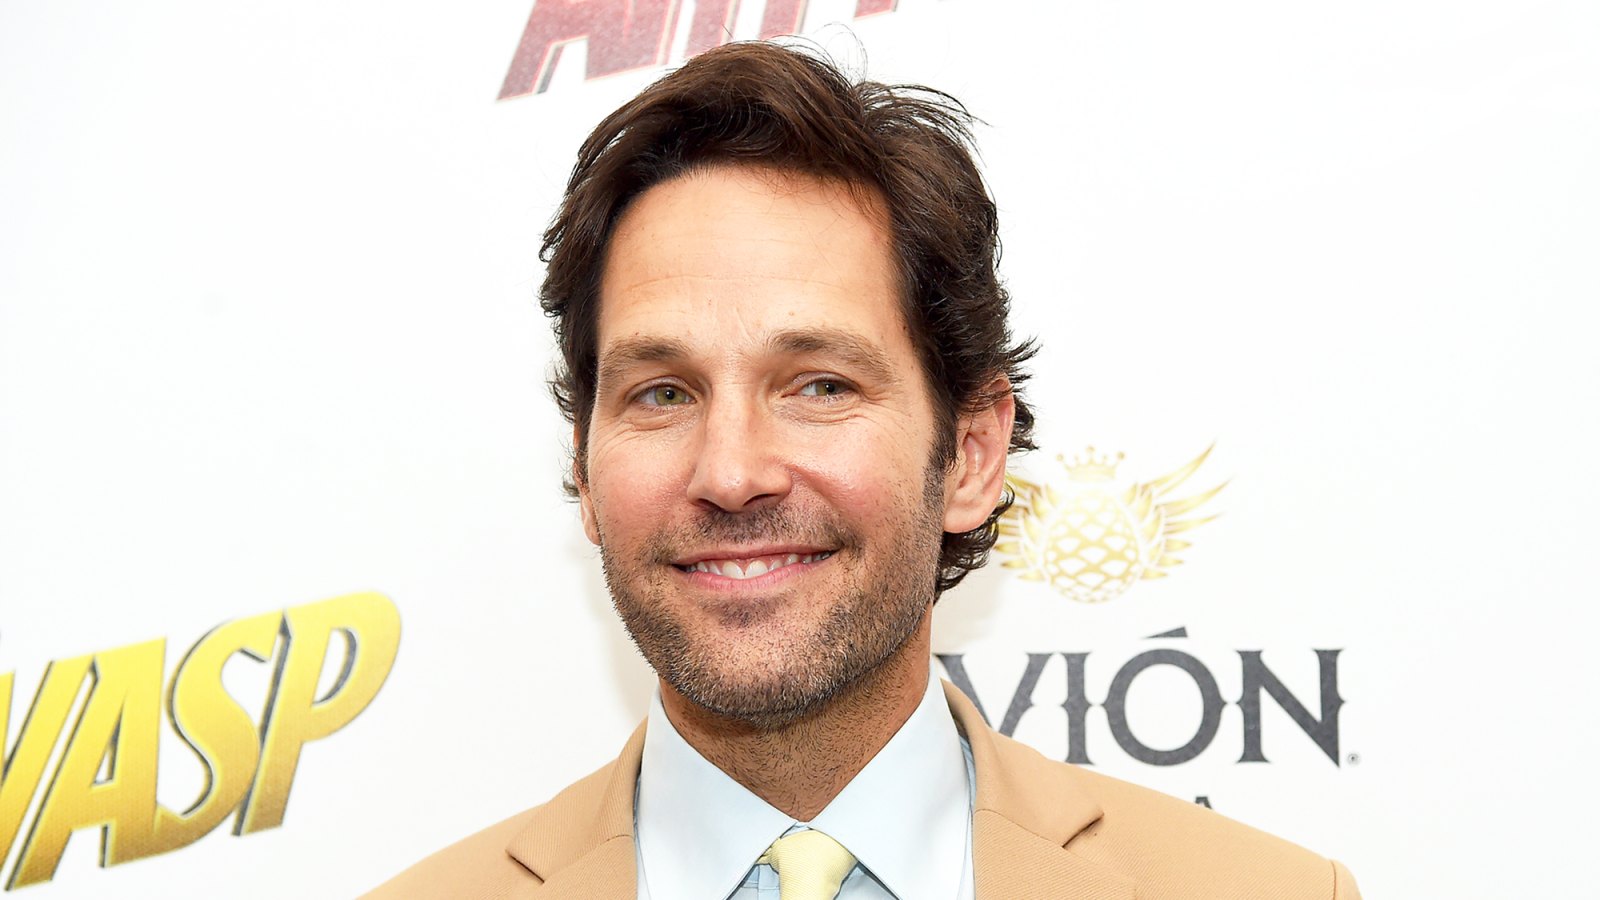 Paul Rudd attends the "Ant-Man And The Wasp" New York Screening at Museum of Modern Art on June 27, 2018 in New York City.